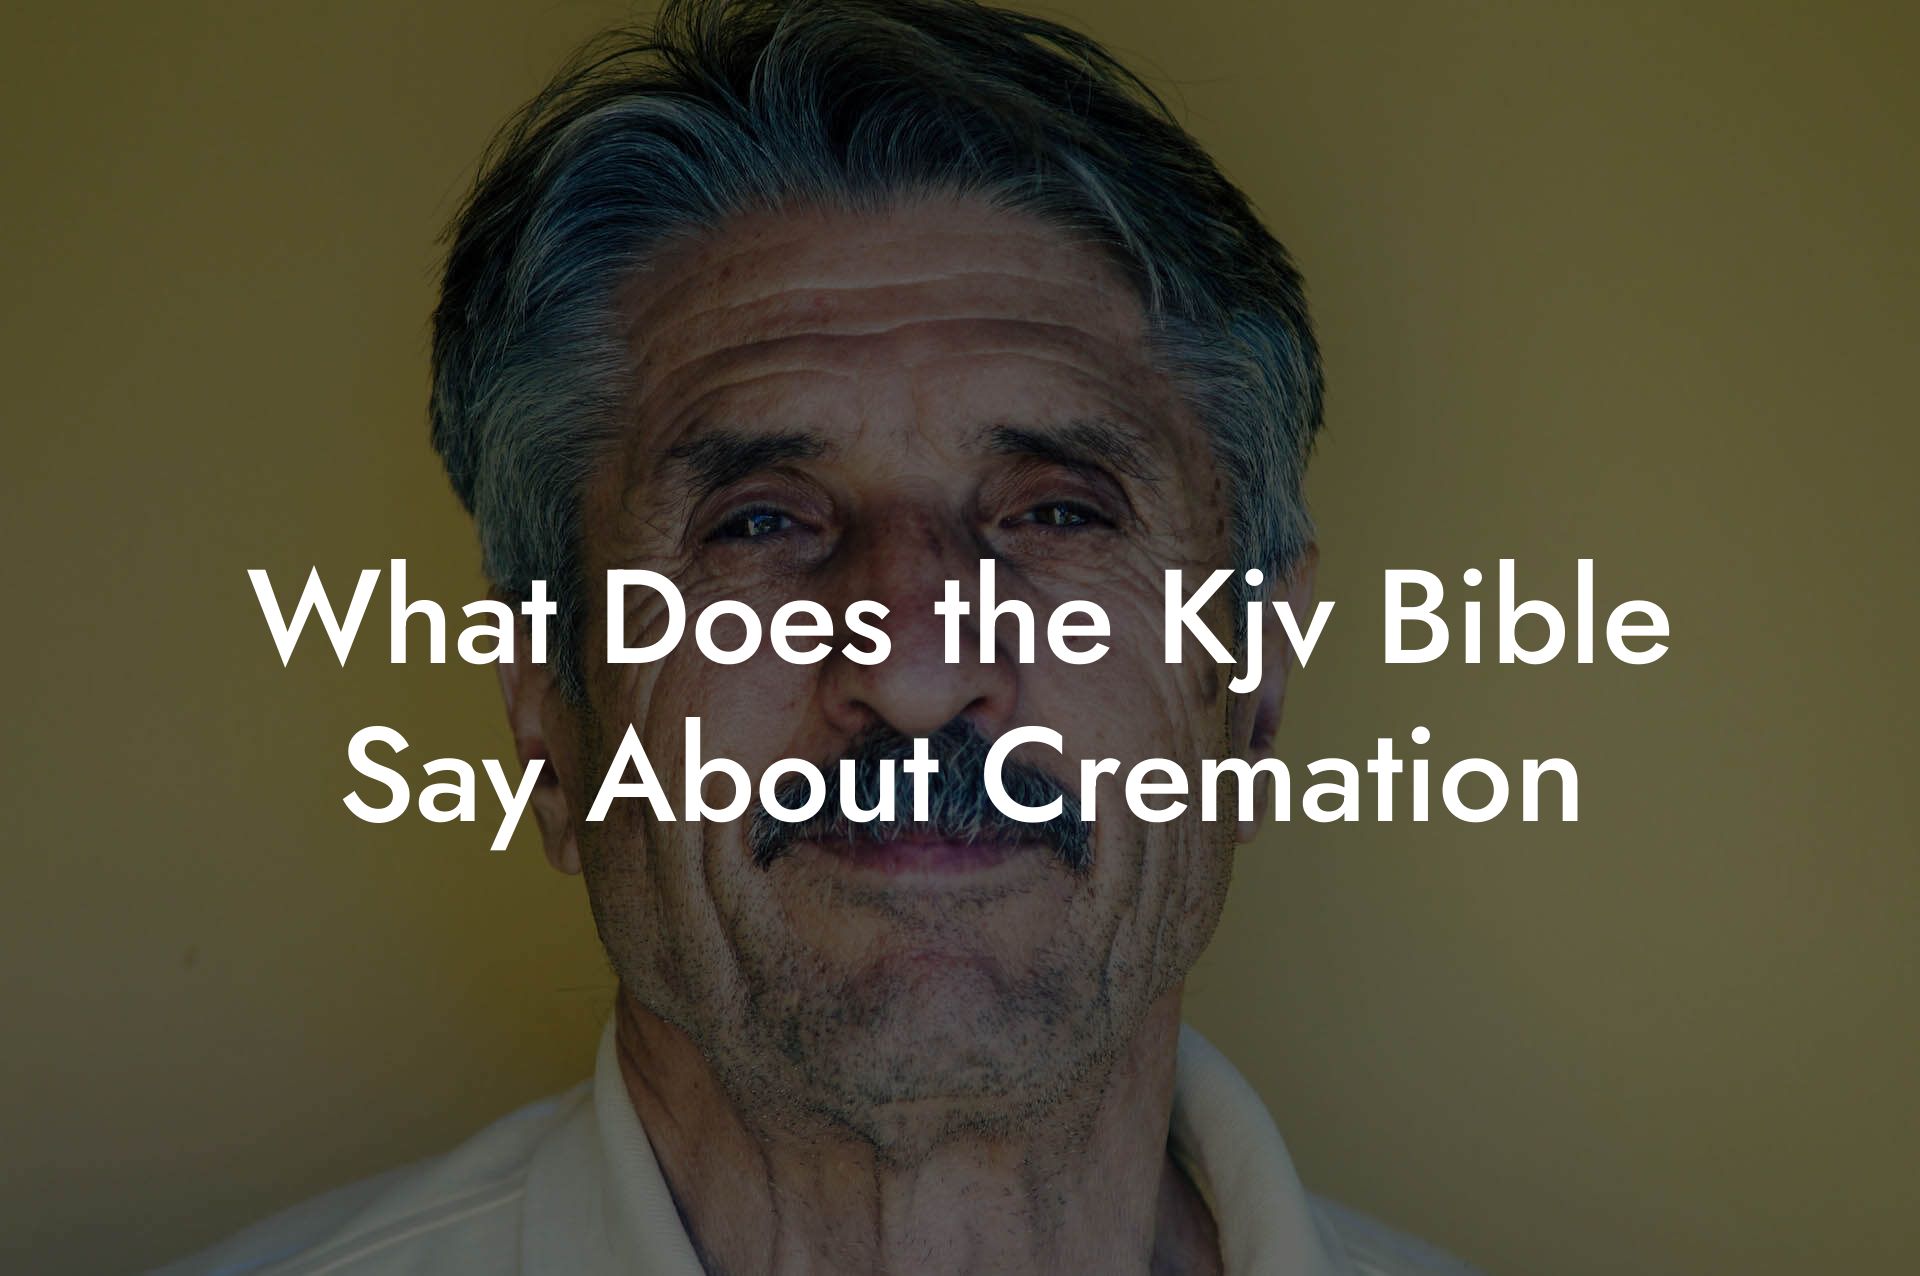 What Does the Kjv Bible Say About Cremation